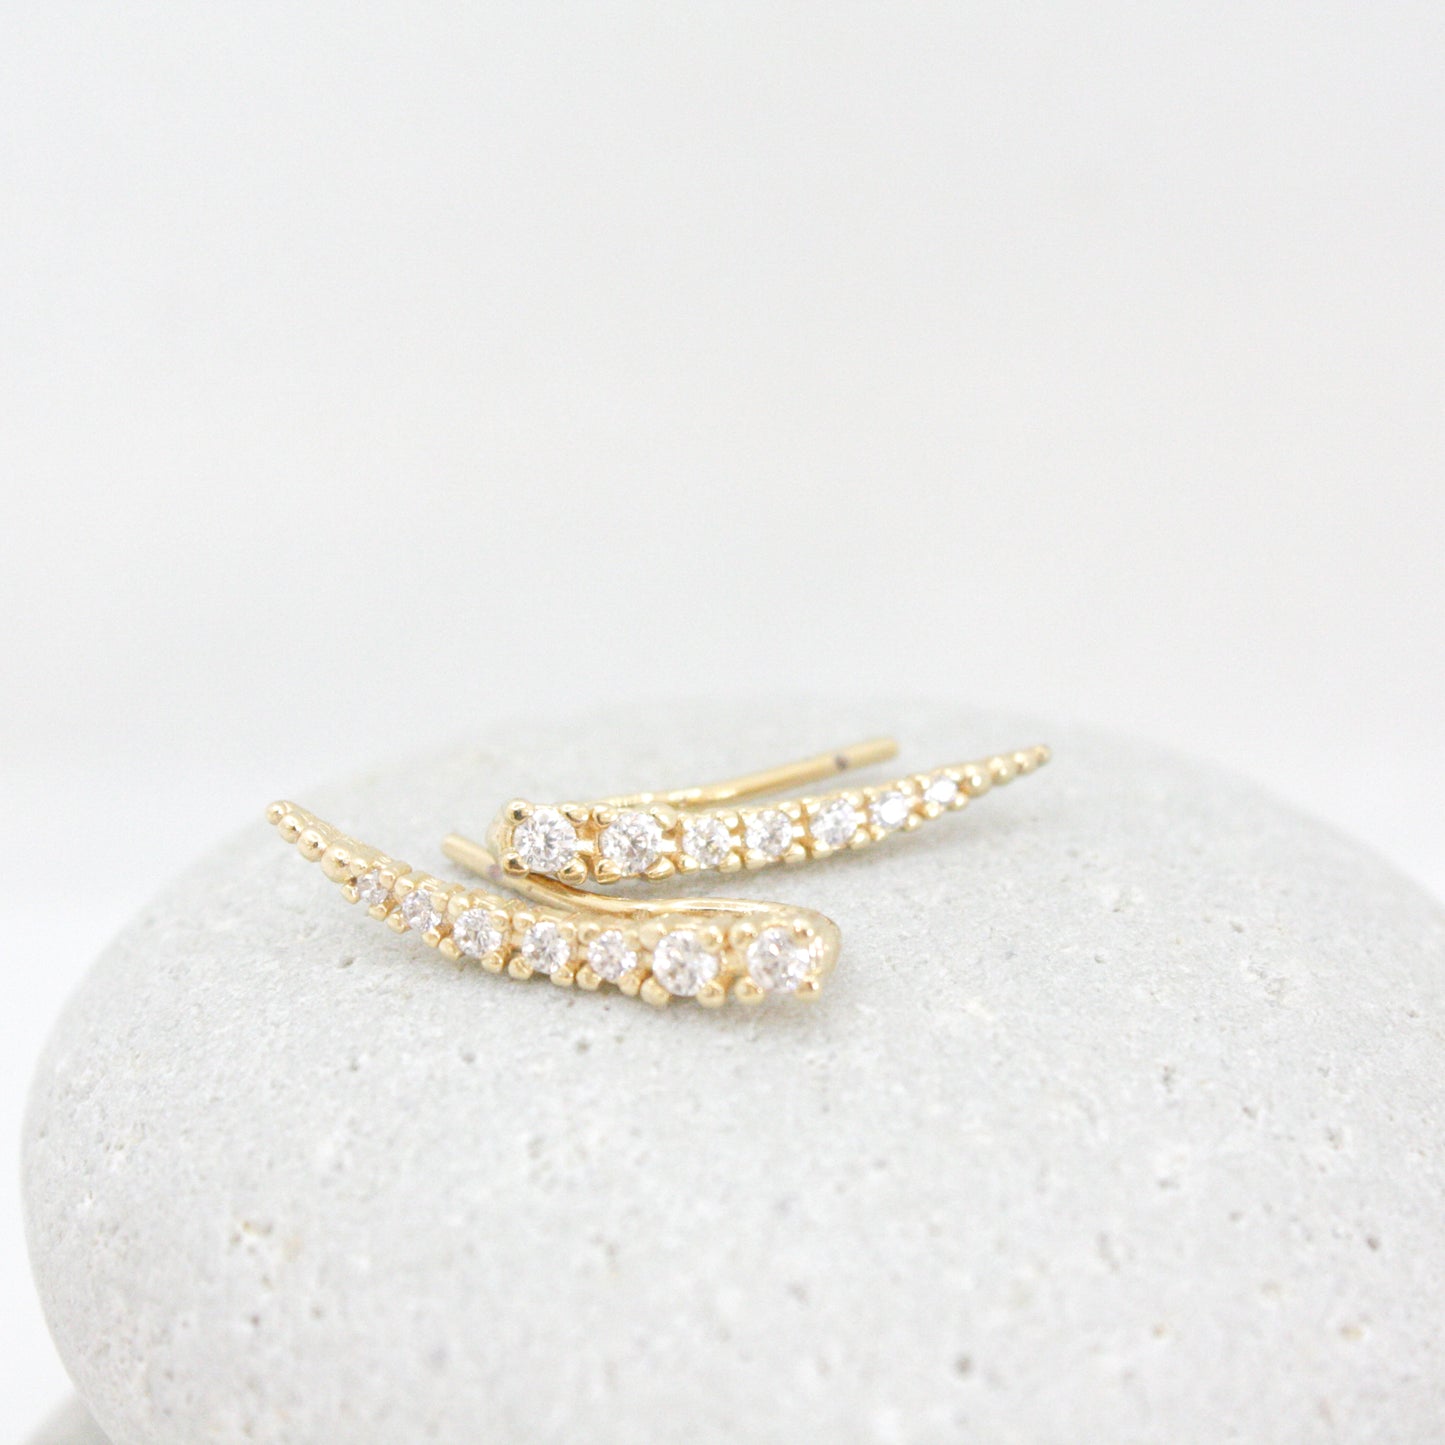 Always Looking Up Ear Climbers :: 18k Gold Filled